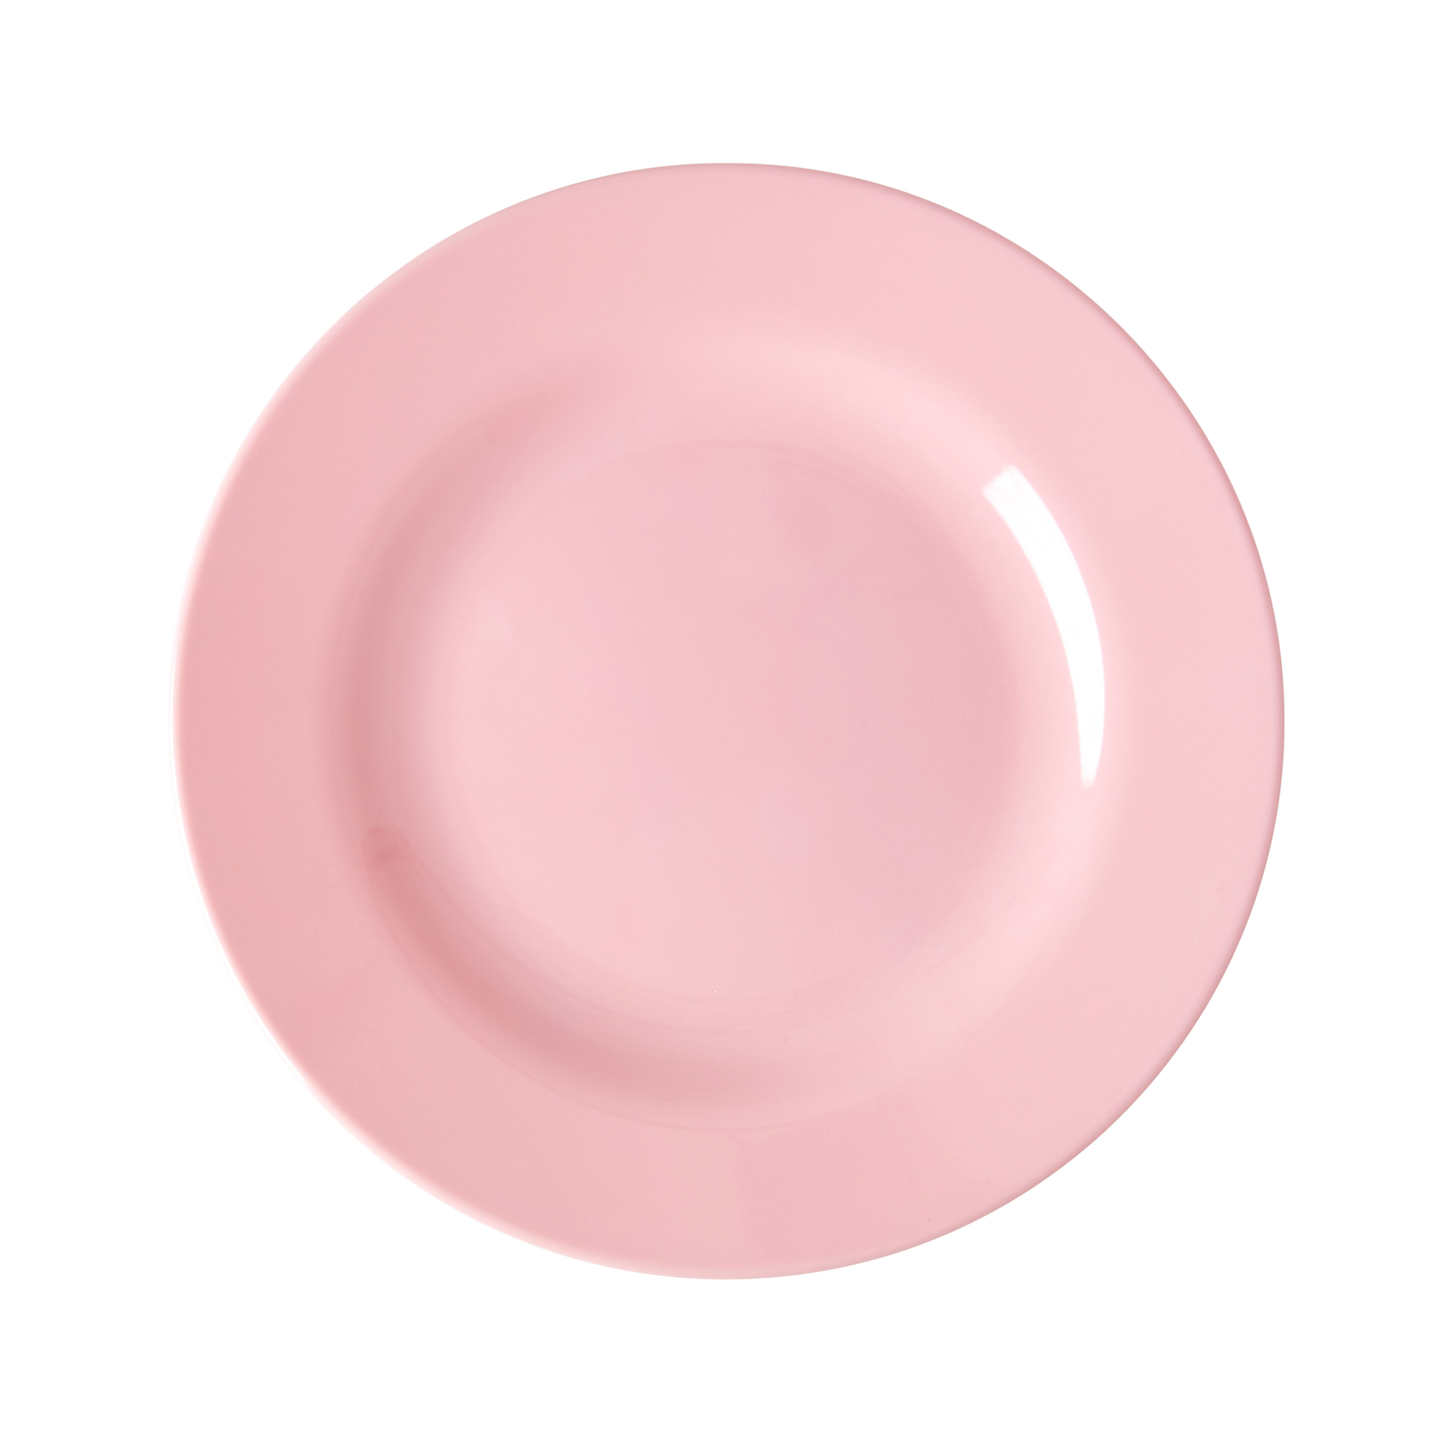 Melamine Lunch Plate | Ballet Slippers Pink - Rice By Rice